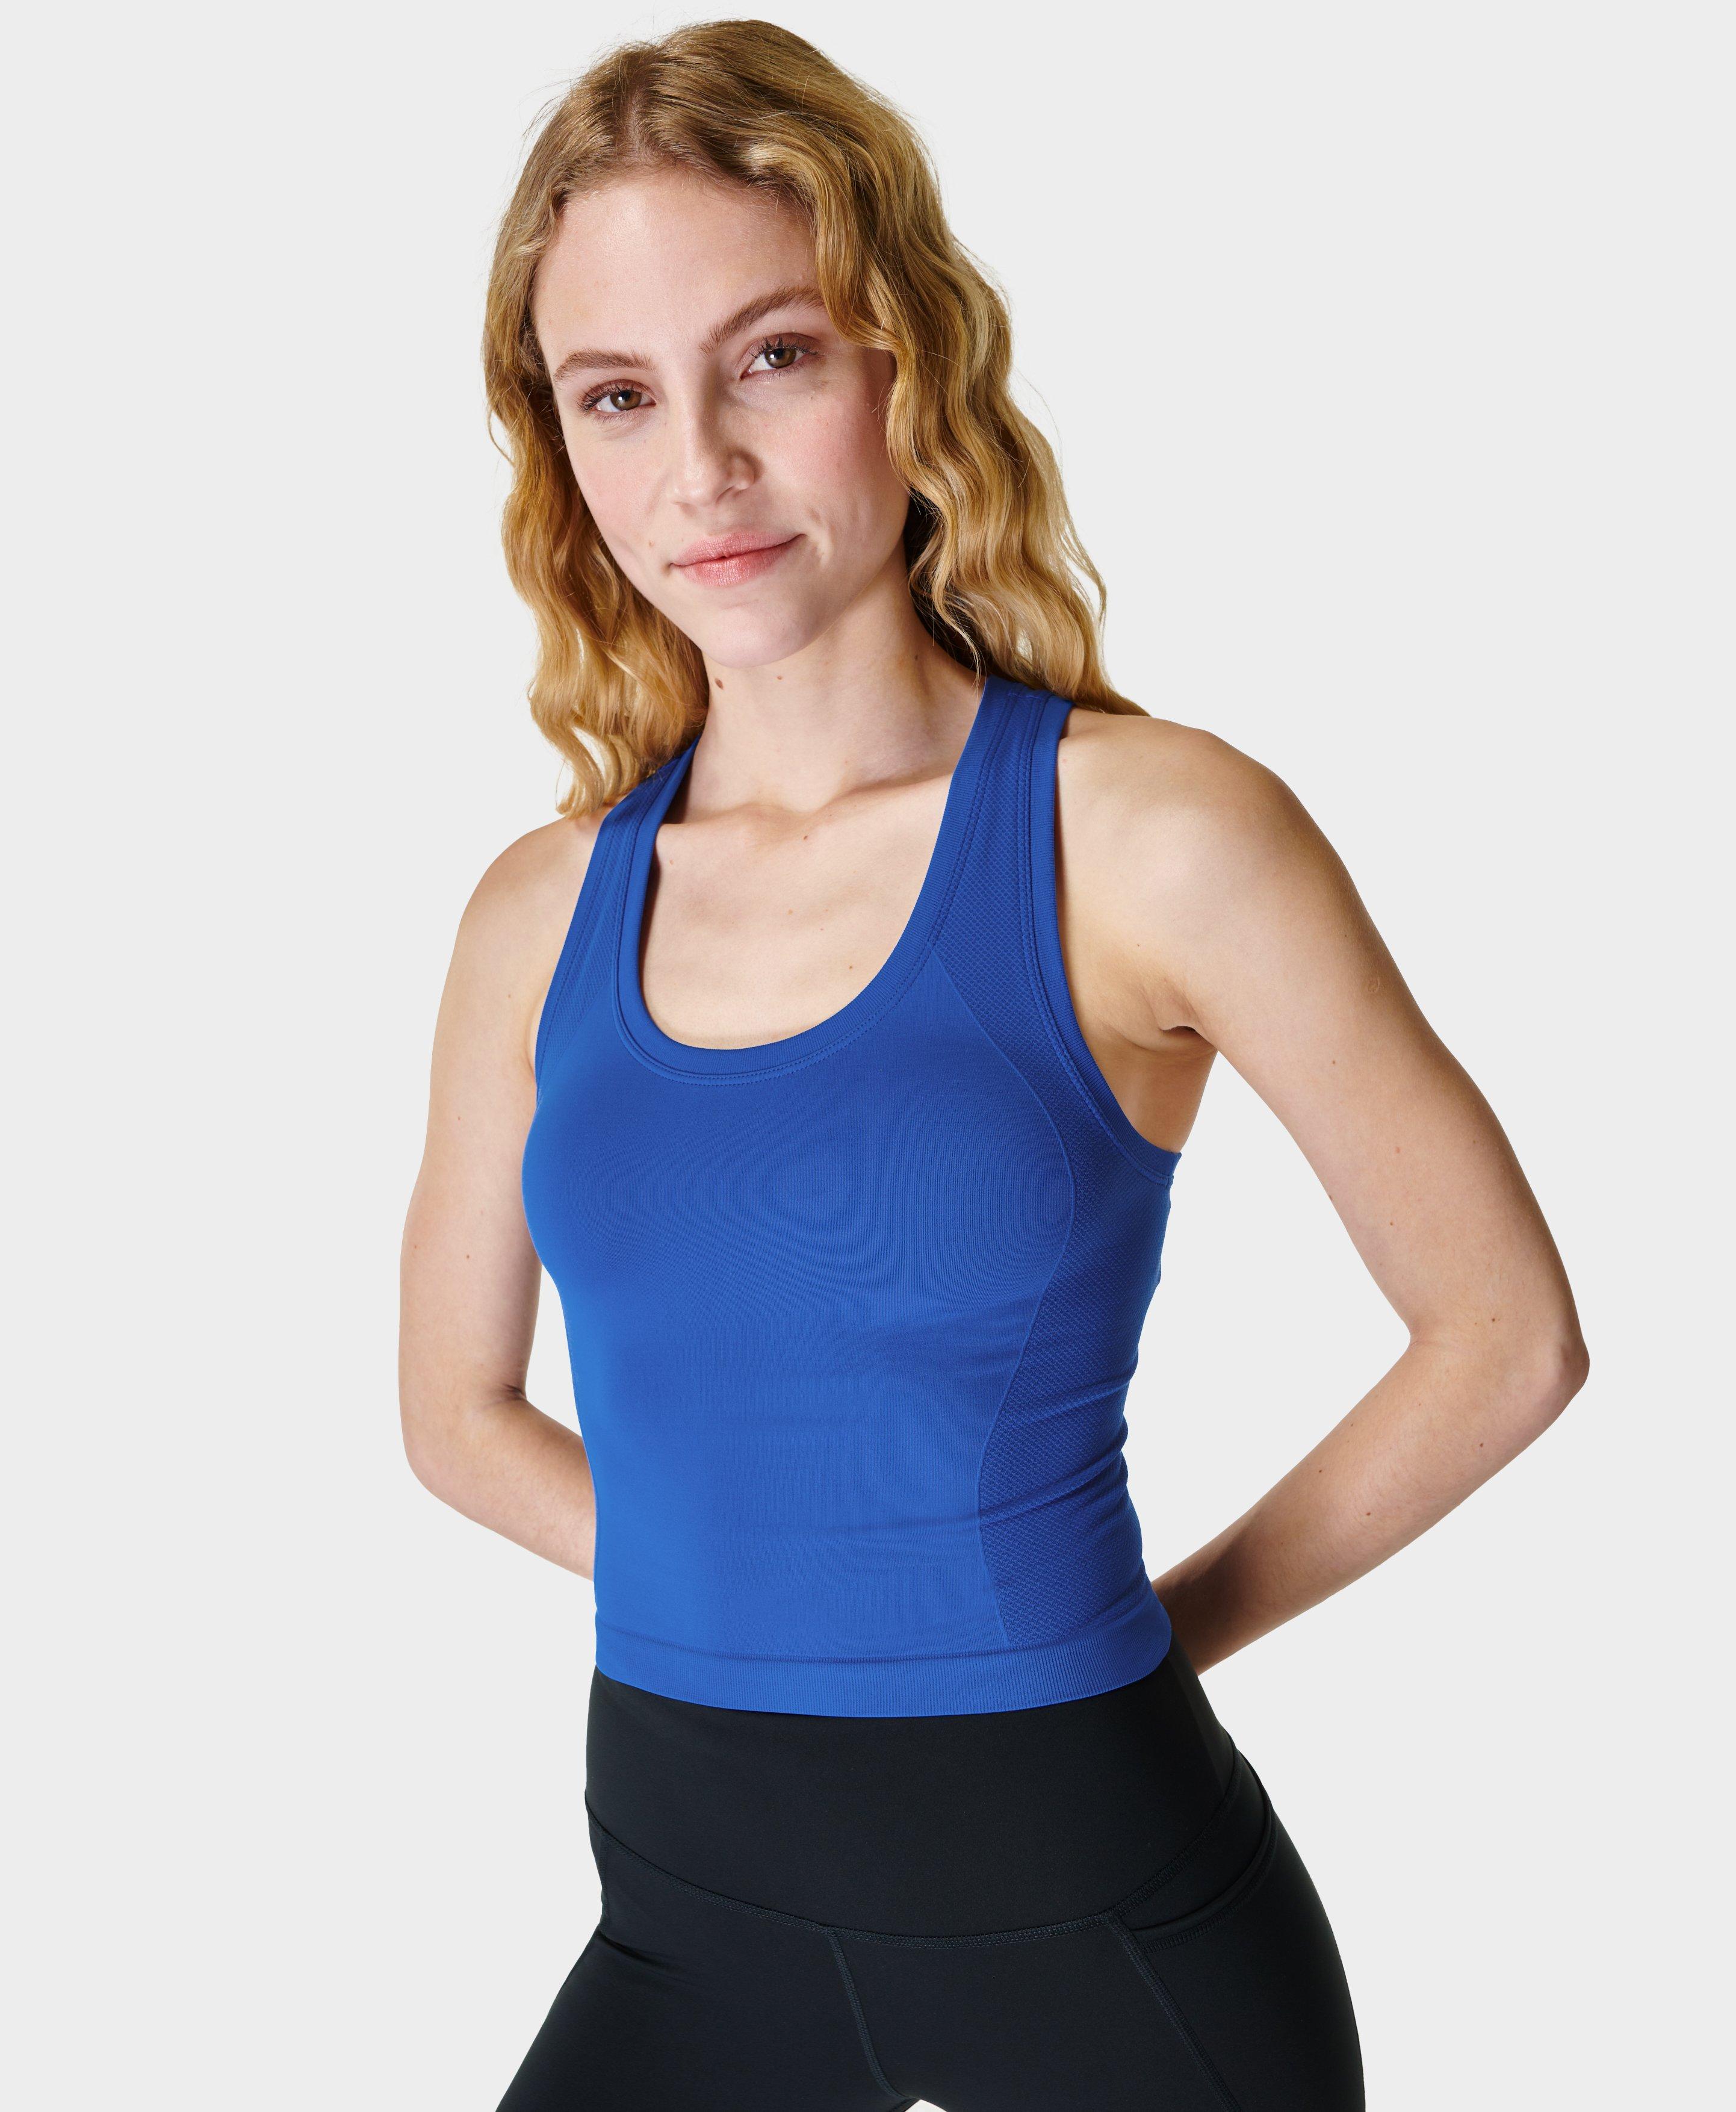 Women's Workout Crop Tops for Women with Built in Sports Bras for Women  Seamless Gym Yoga Tank Tops Blue,XL